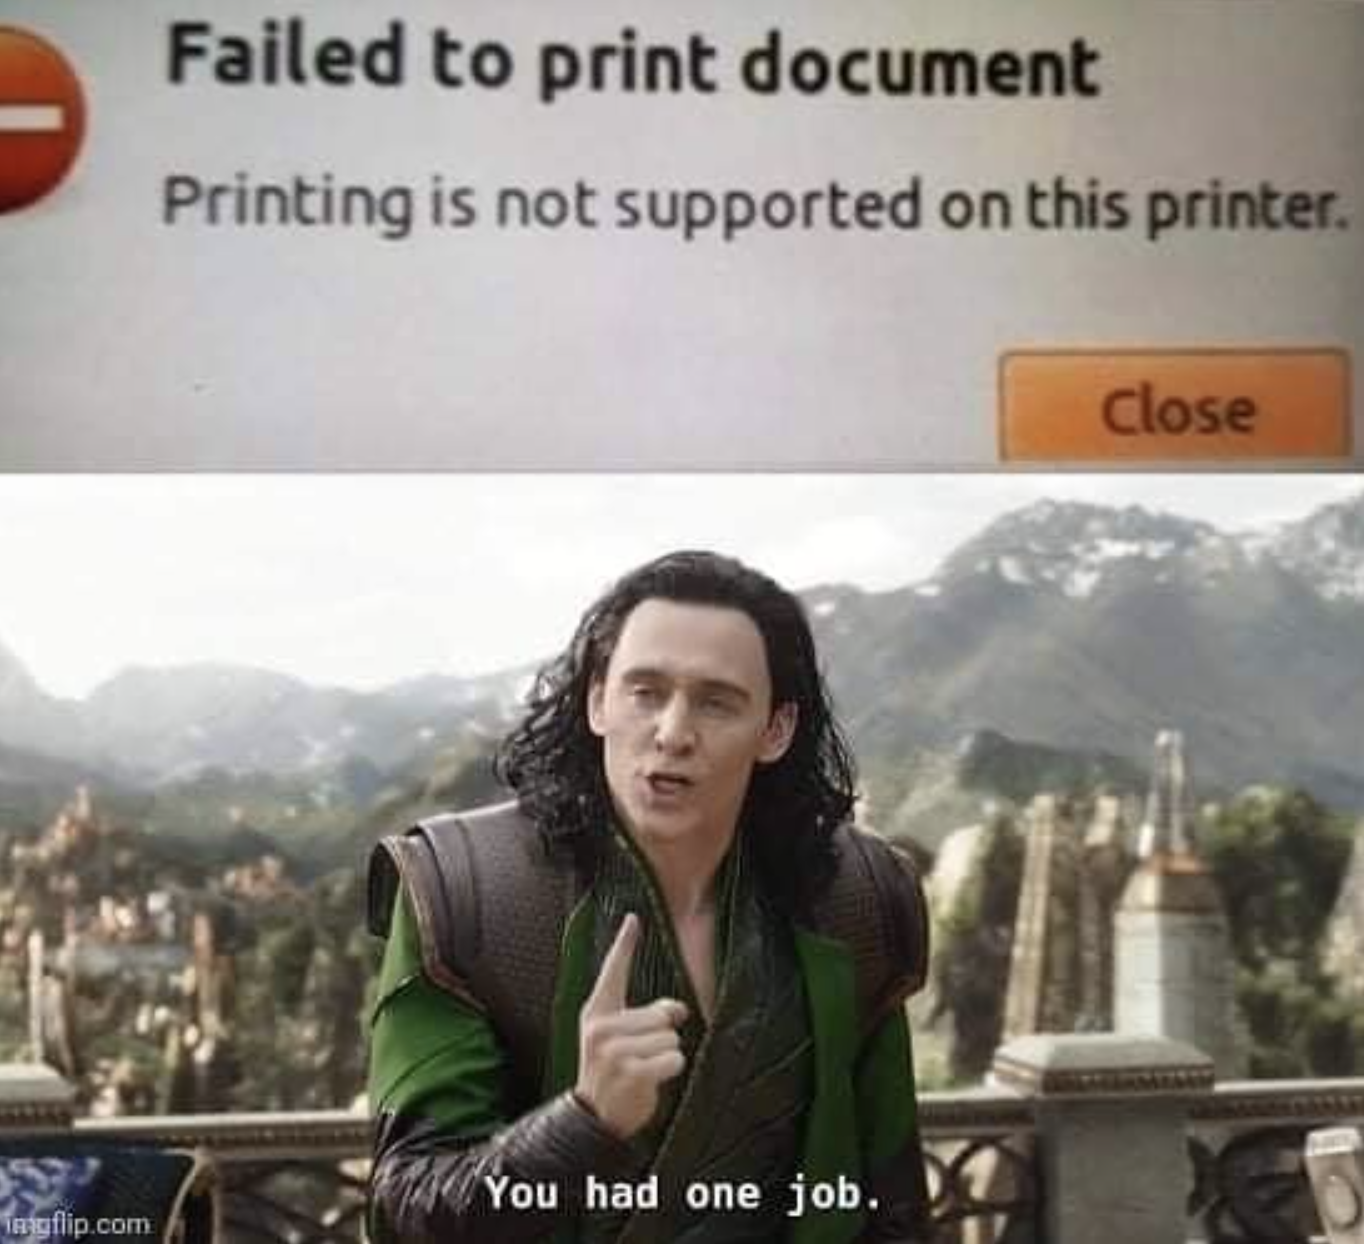 People Who Didn't Do Their Only Job - Failed to print document Printing is not supported on this printer. You had one job. Close